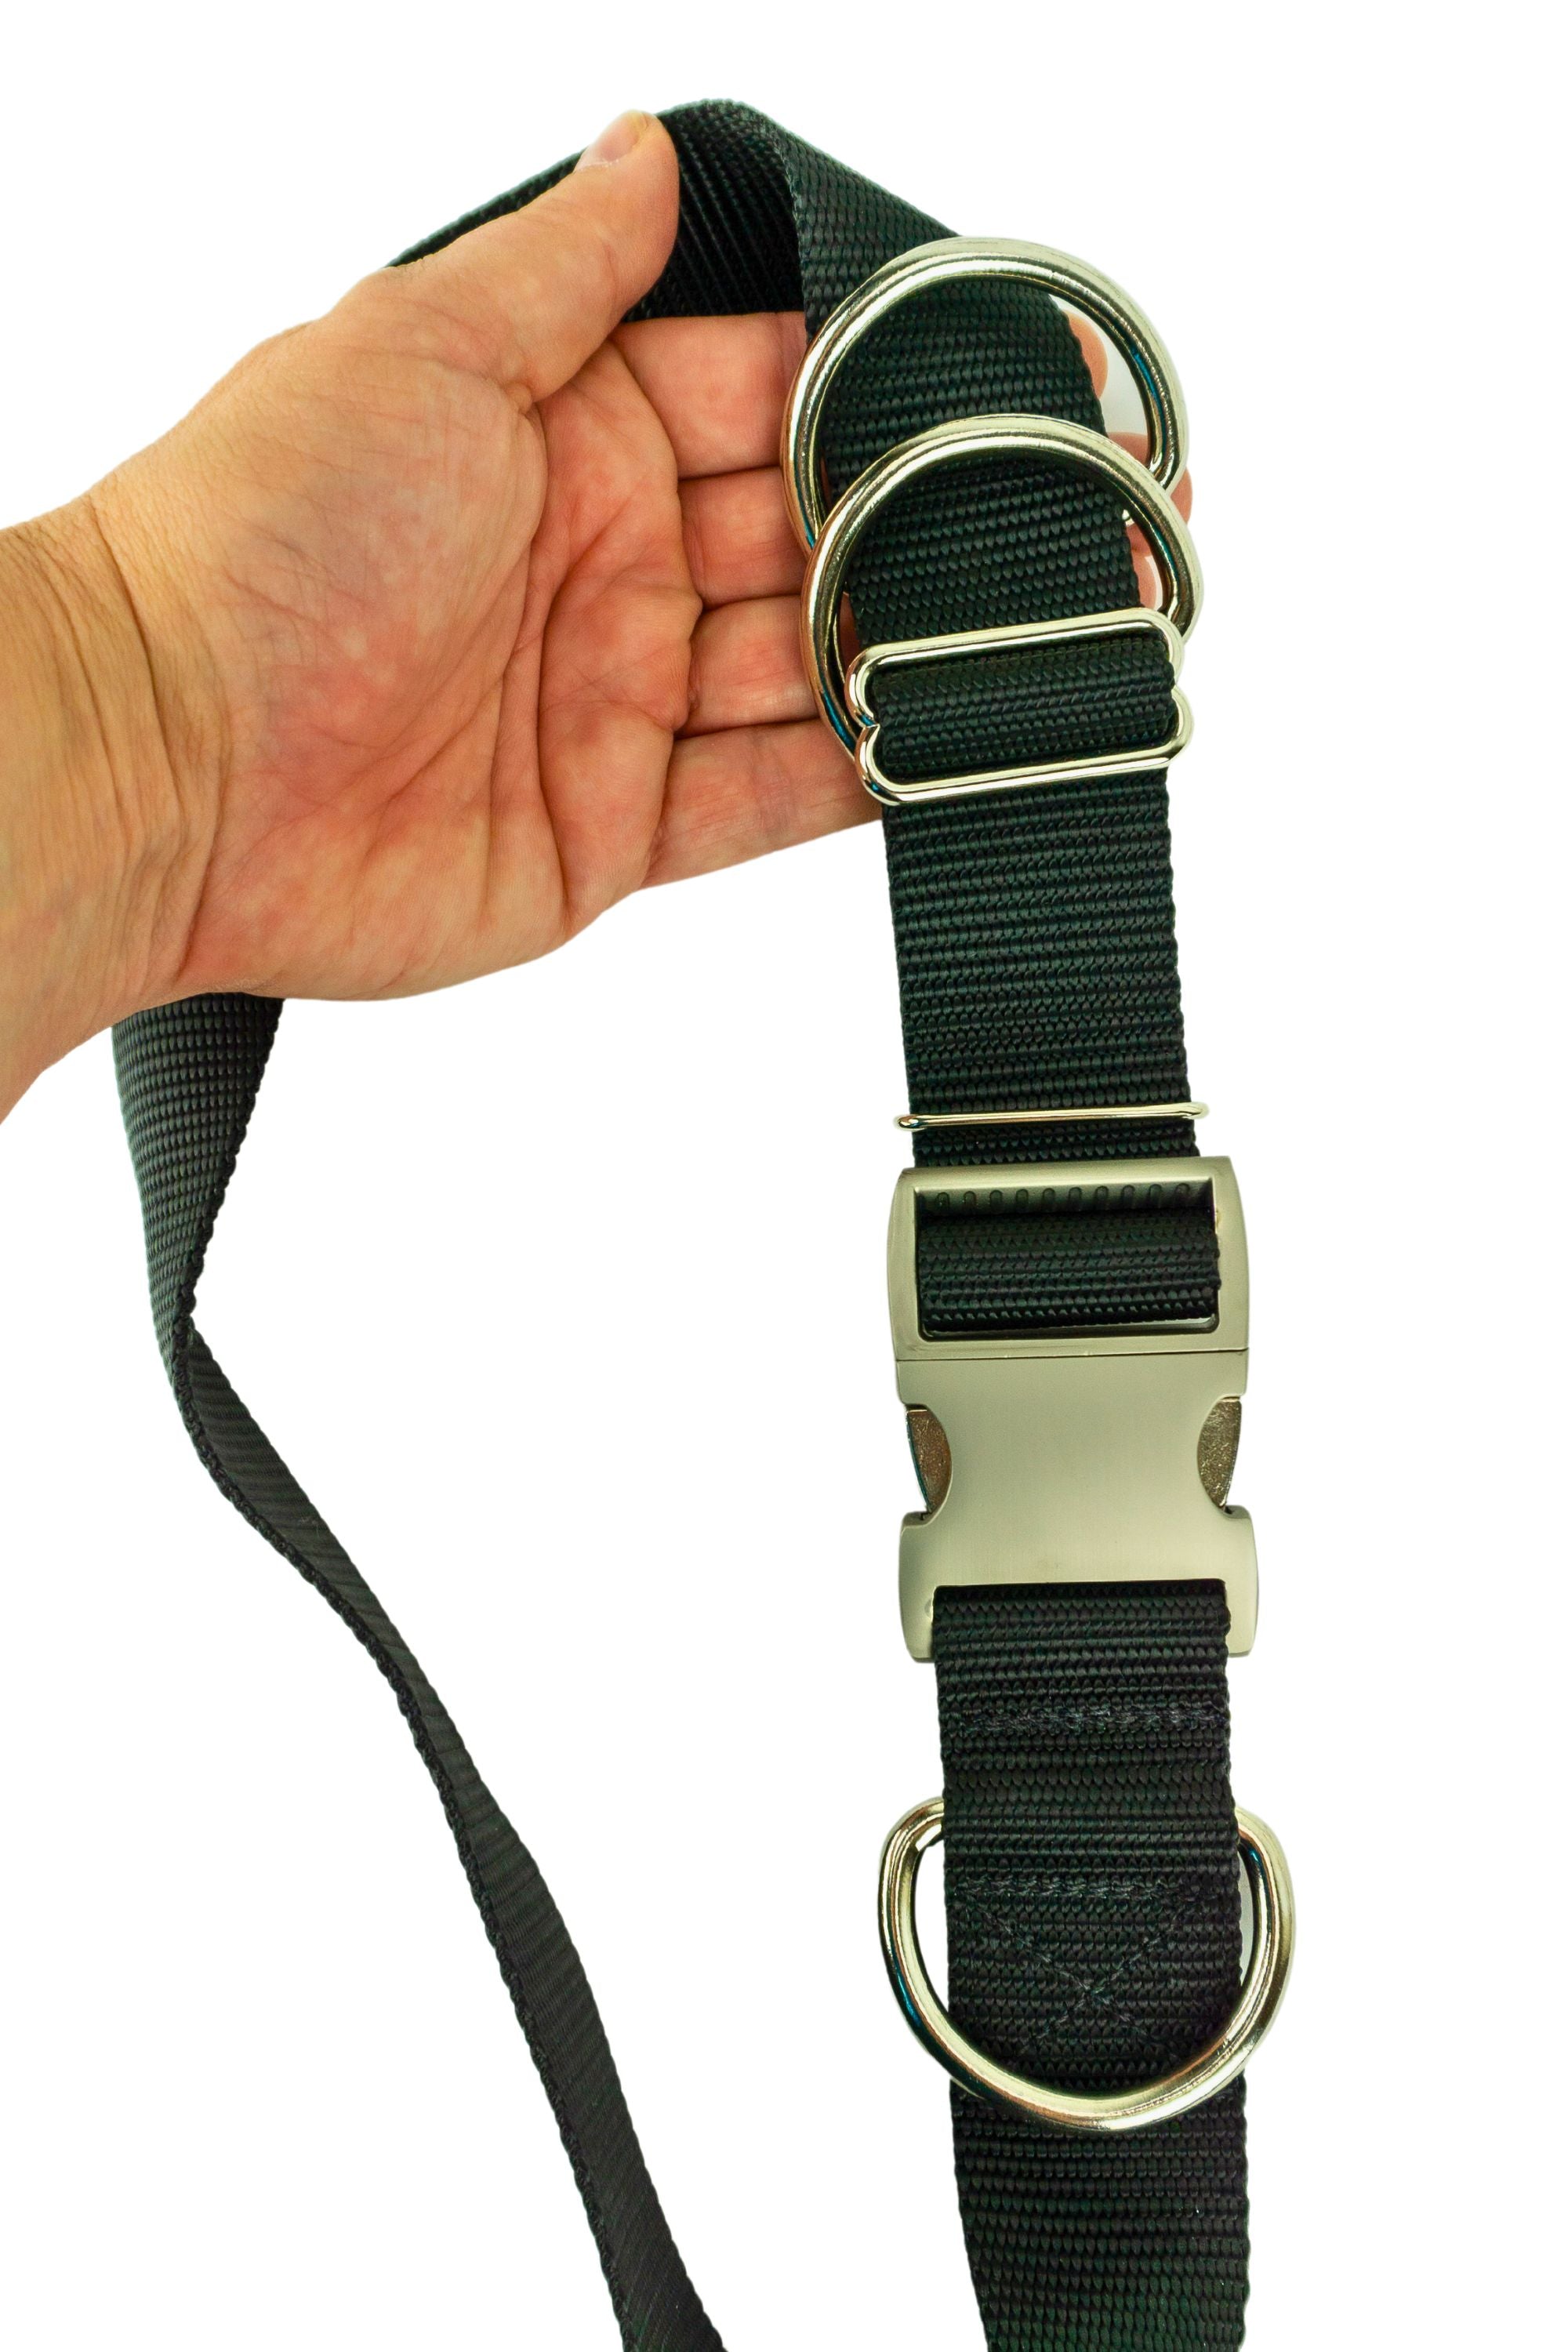 Heavy Duty hands free leash belt held in the hand of an adult to show the scale of the belt hardware.